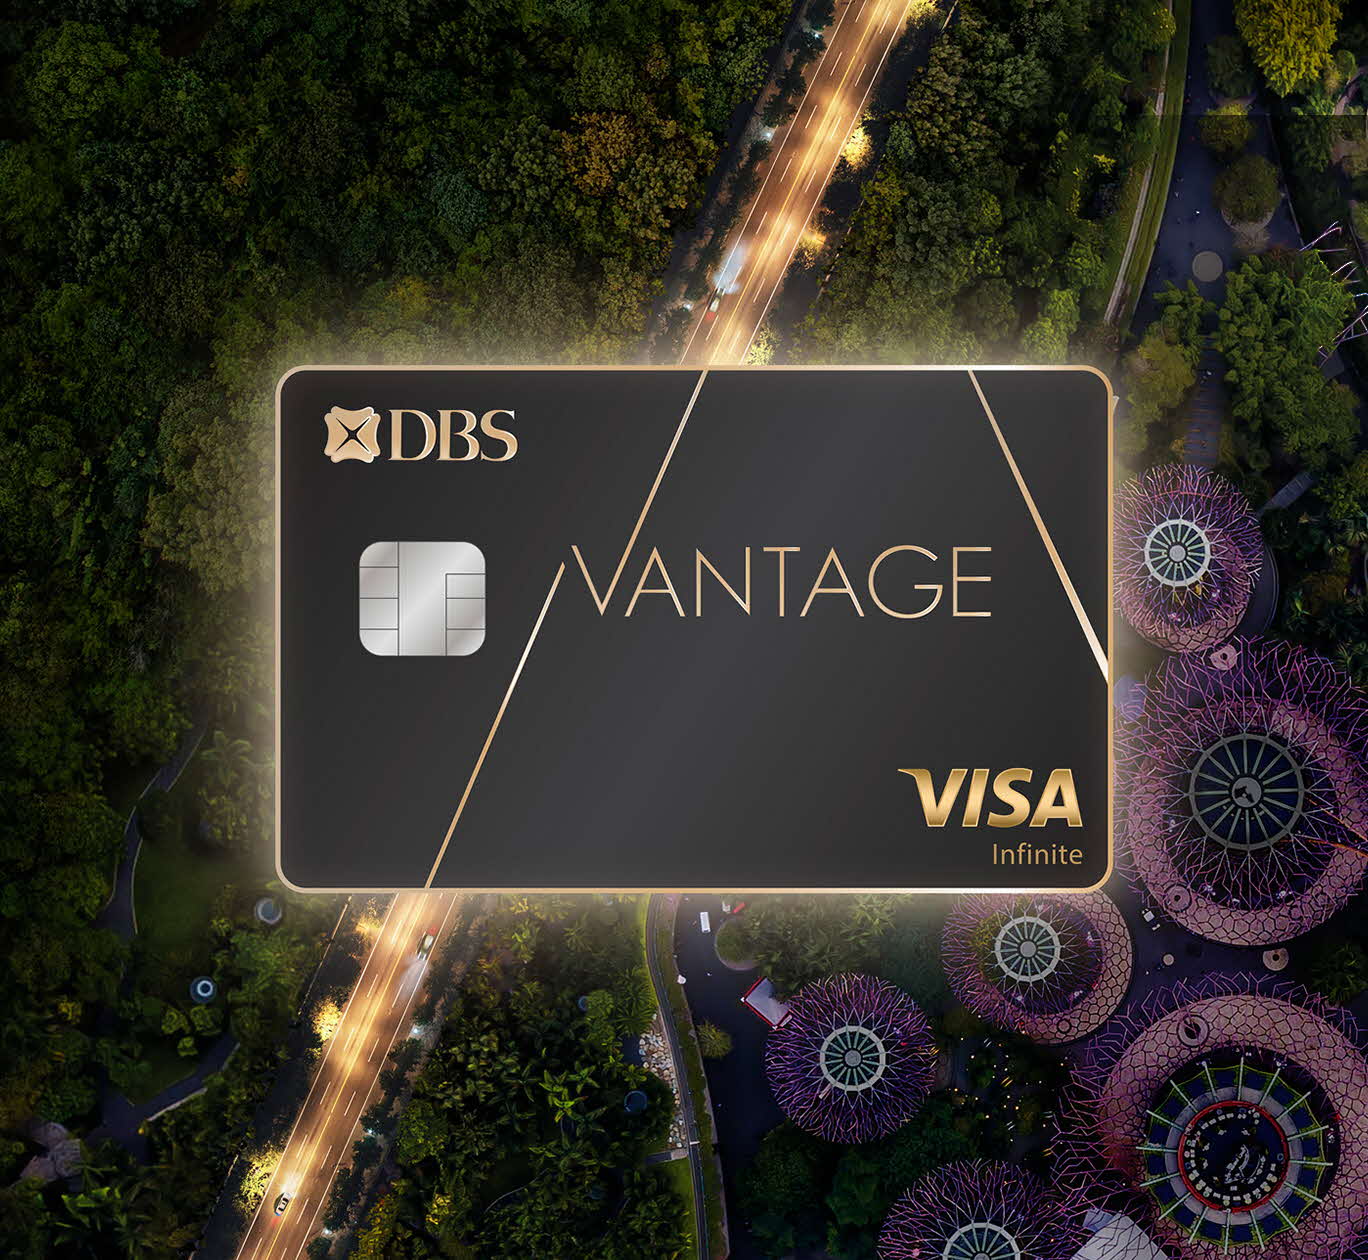 Enjoy up to 80,000 miles when you sign up for DBS Vantage Card by 26 April 2023